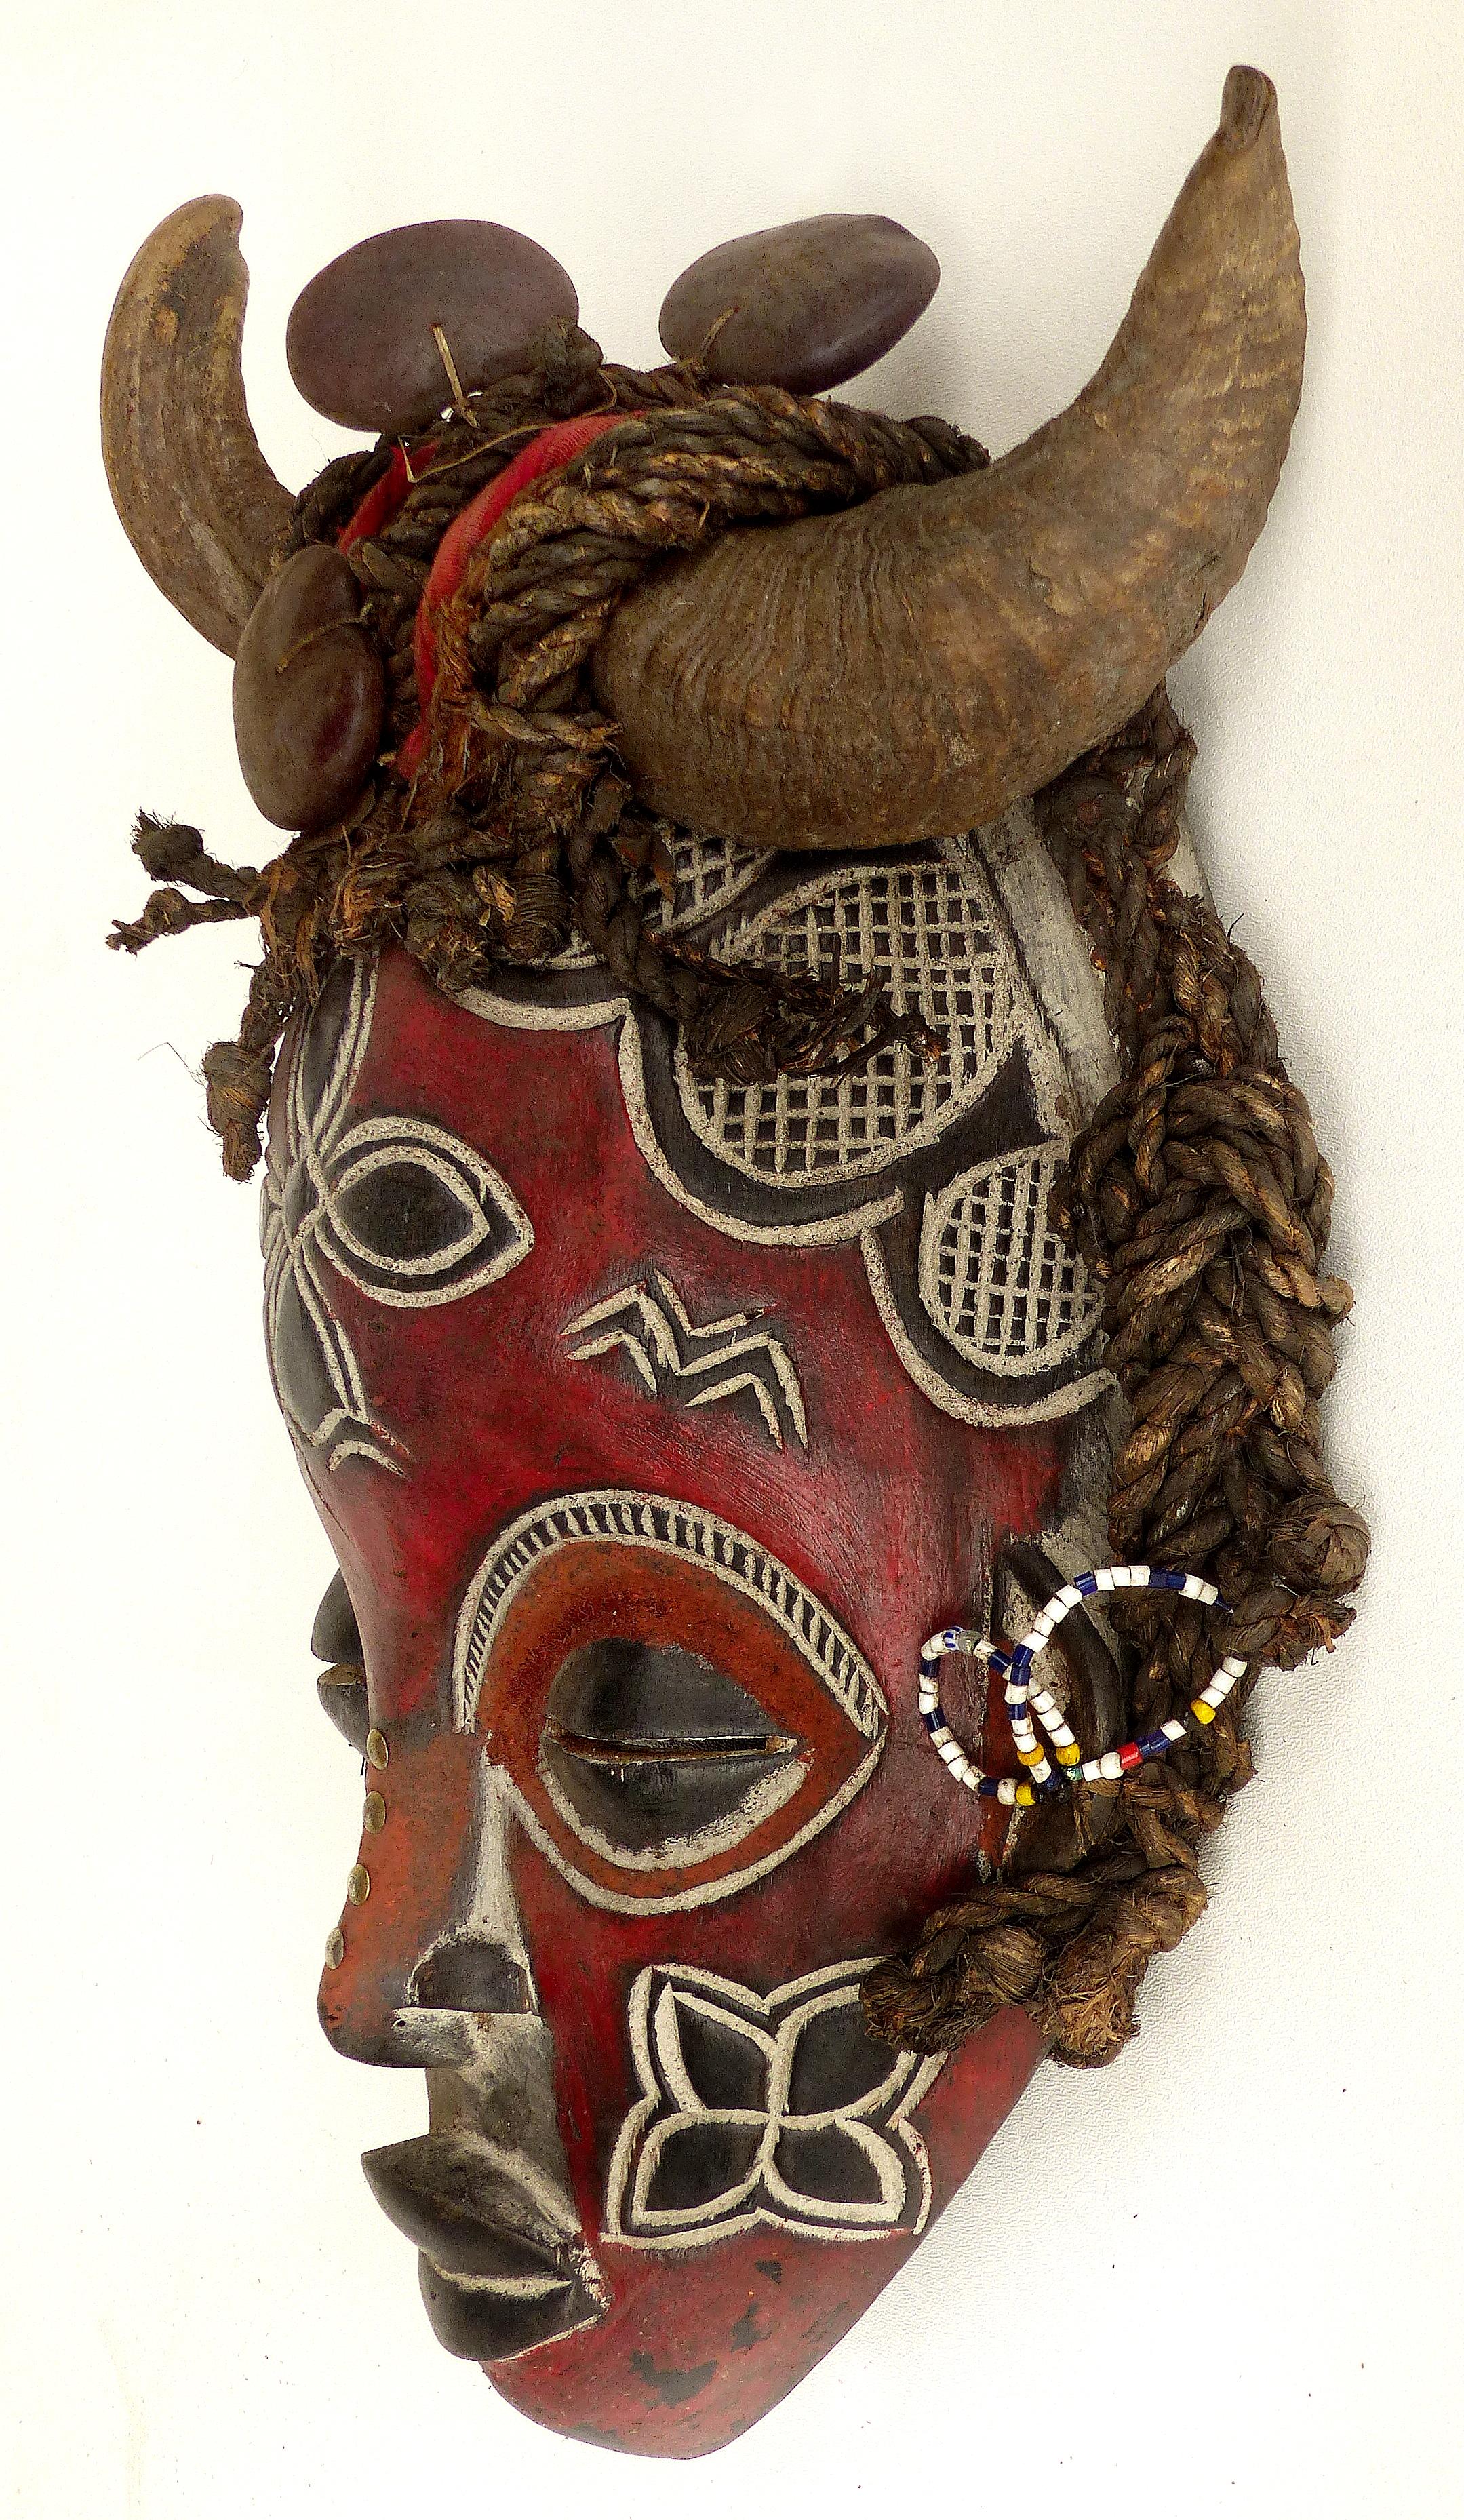 Cameroon Bamileke Tribal Carved Horned Mask Embellished with Sea Beans & Beads

Offered for sale is an interesting carved mask from the Bamileke people of Cameroon, Africa. This interesting and decorative mask is decorated with horns, lucky sea